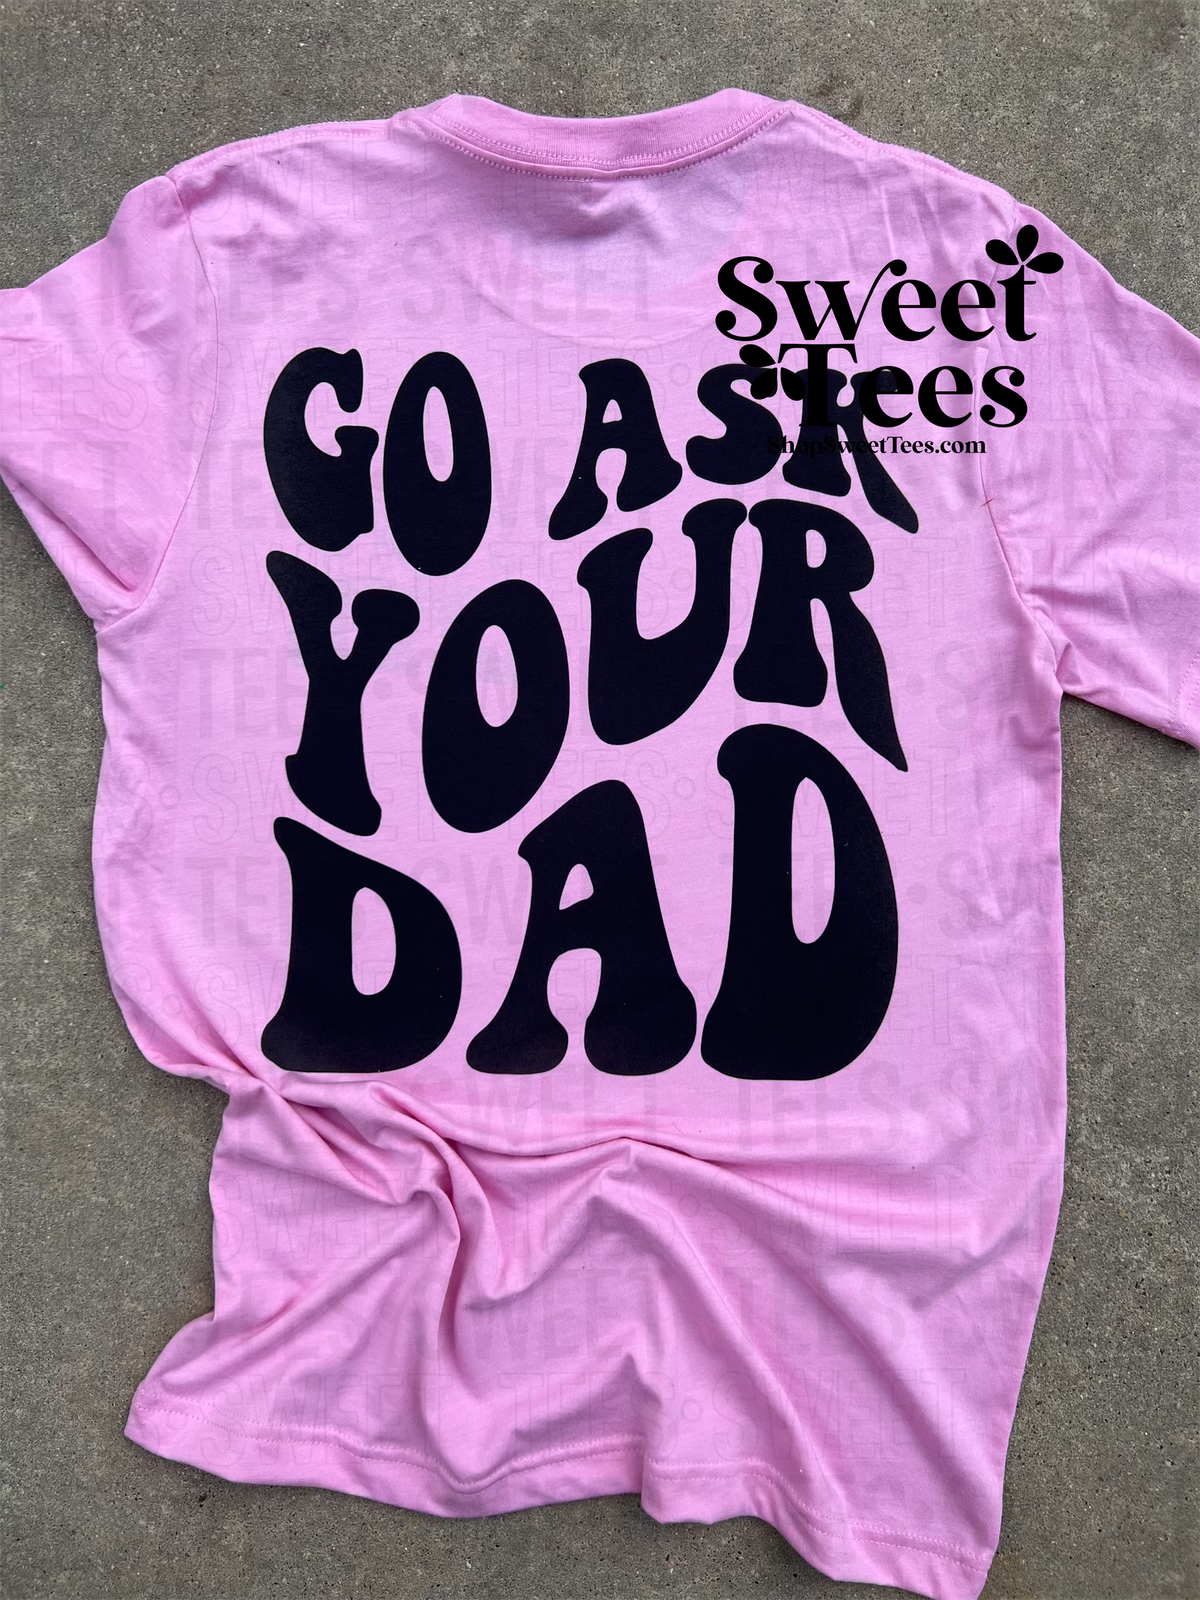 Go Ask Your Dad tee